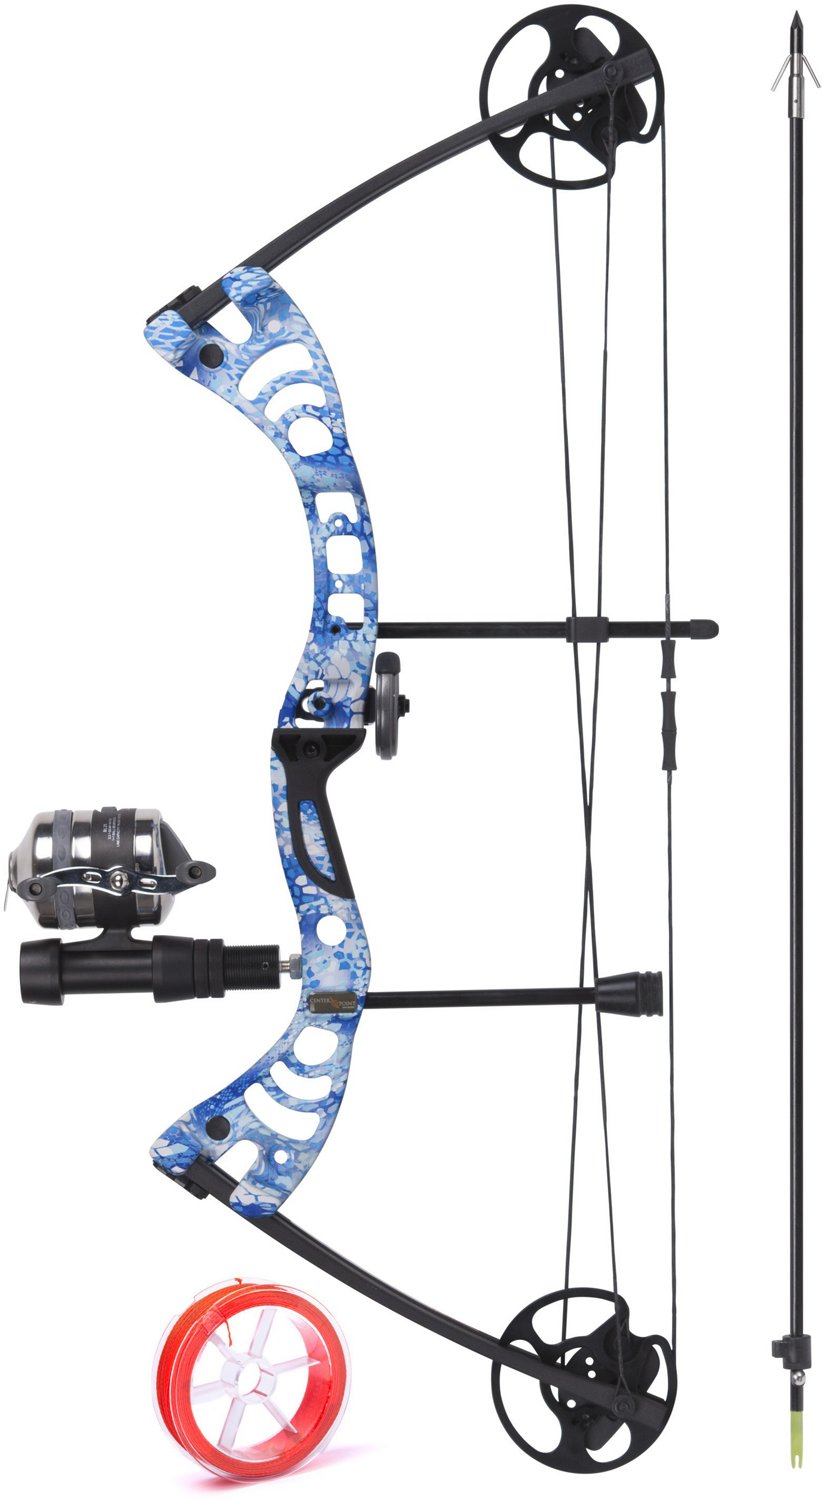 Mudcat Recurve Bowfishing Bow Kit 40lbs with Wrap Style Reel - Black